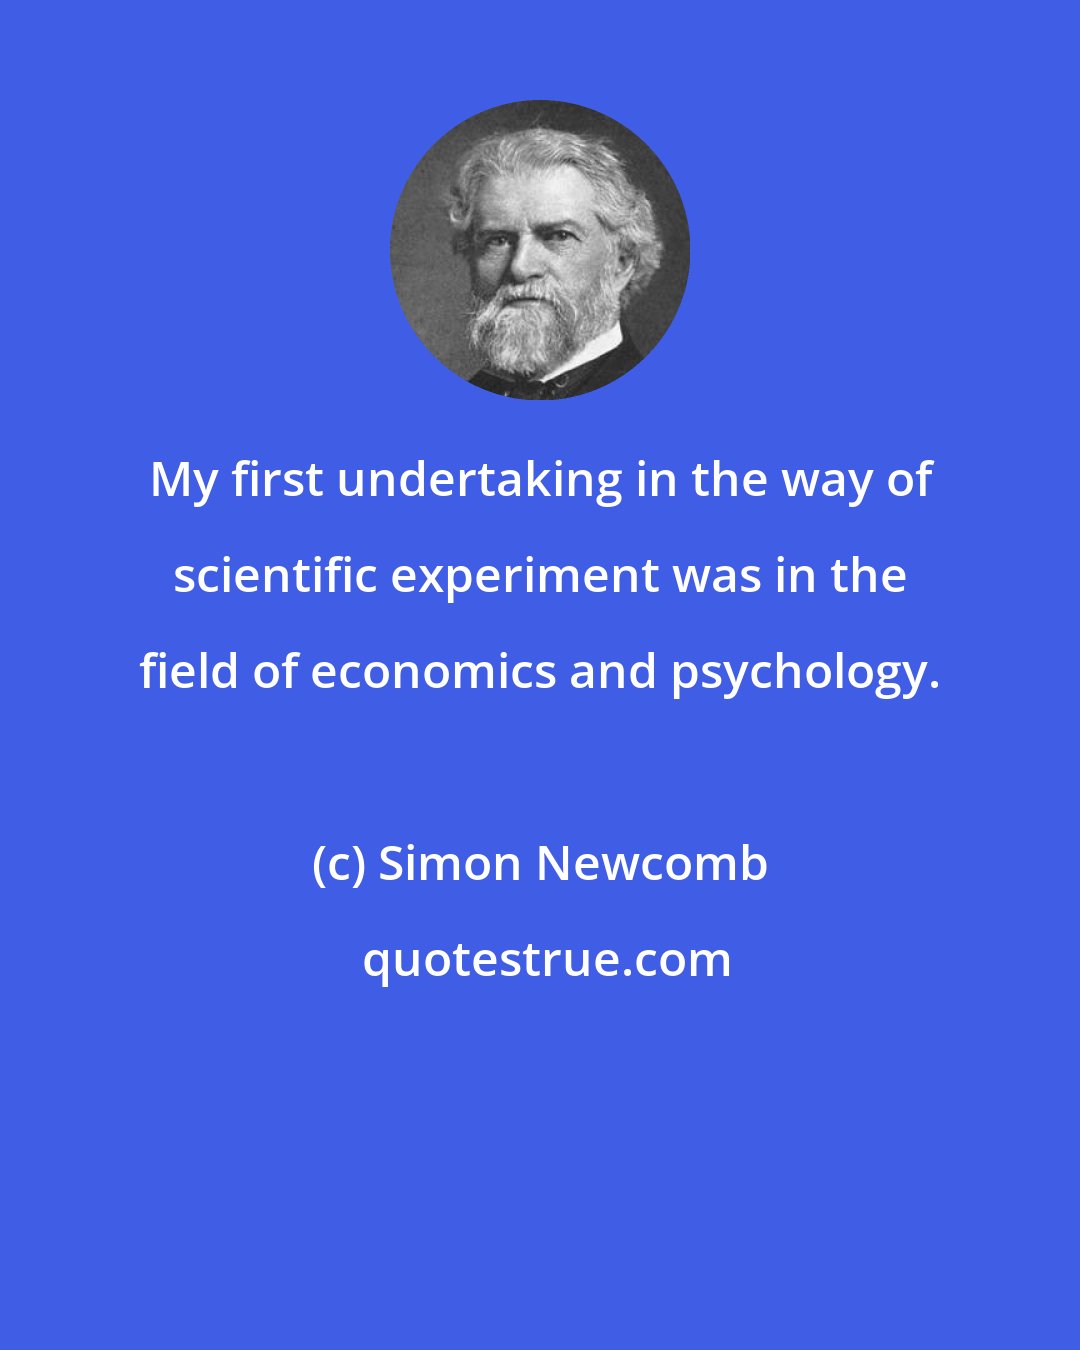 Simon Newcomb: My first undertaking in the way of scientific experiment was in the field of economics and psychology.